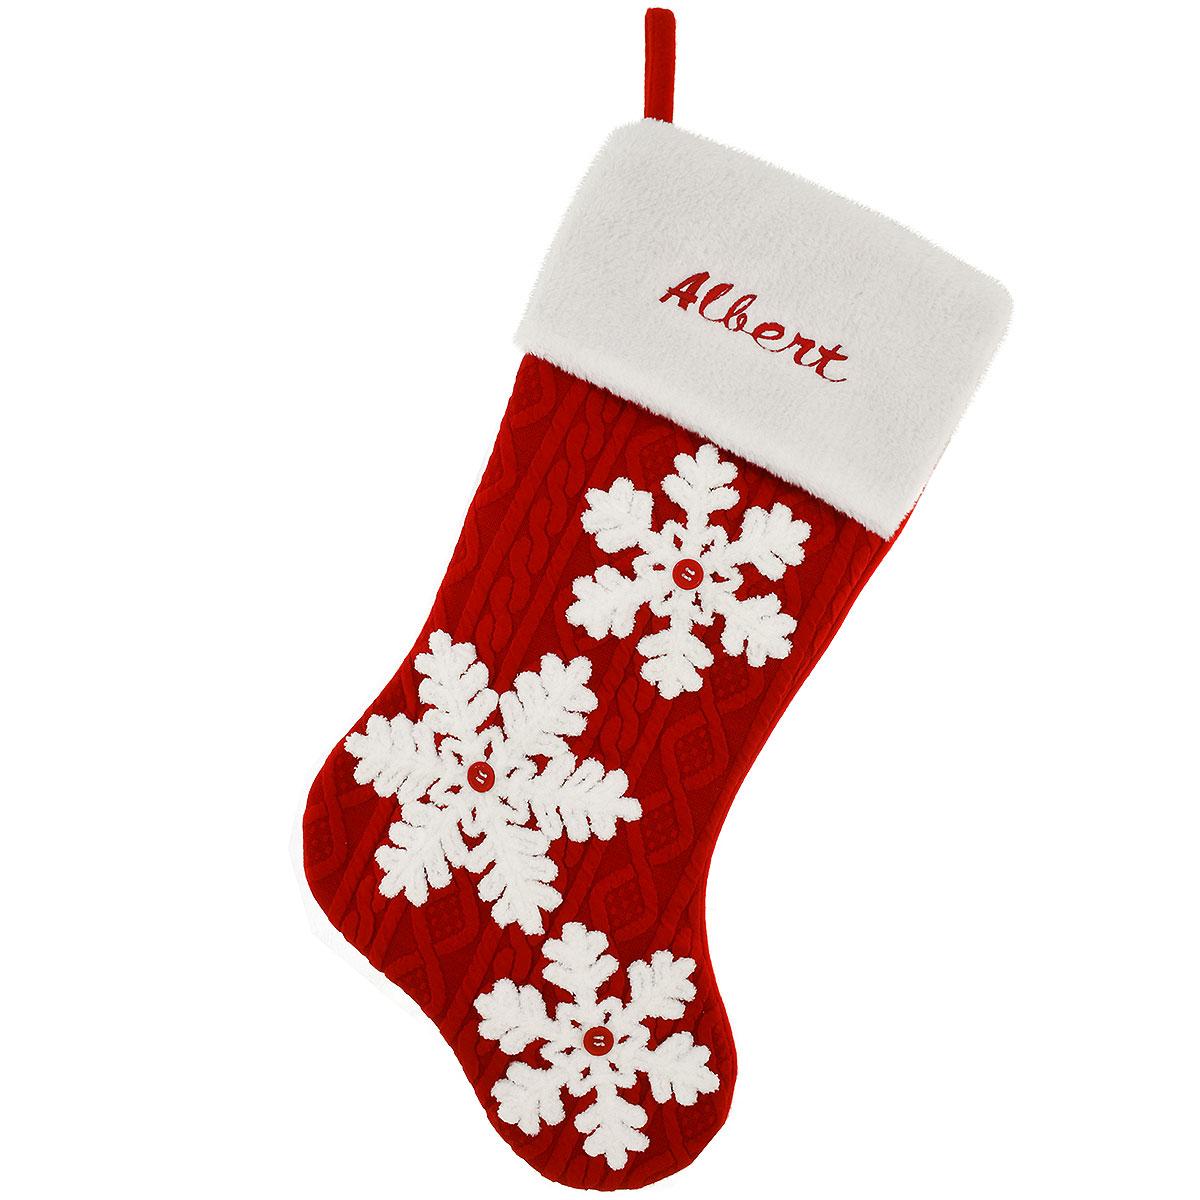 Personalized 20.5" Stamped Knit Snowflake Stocking